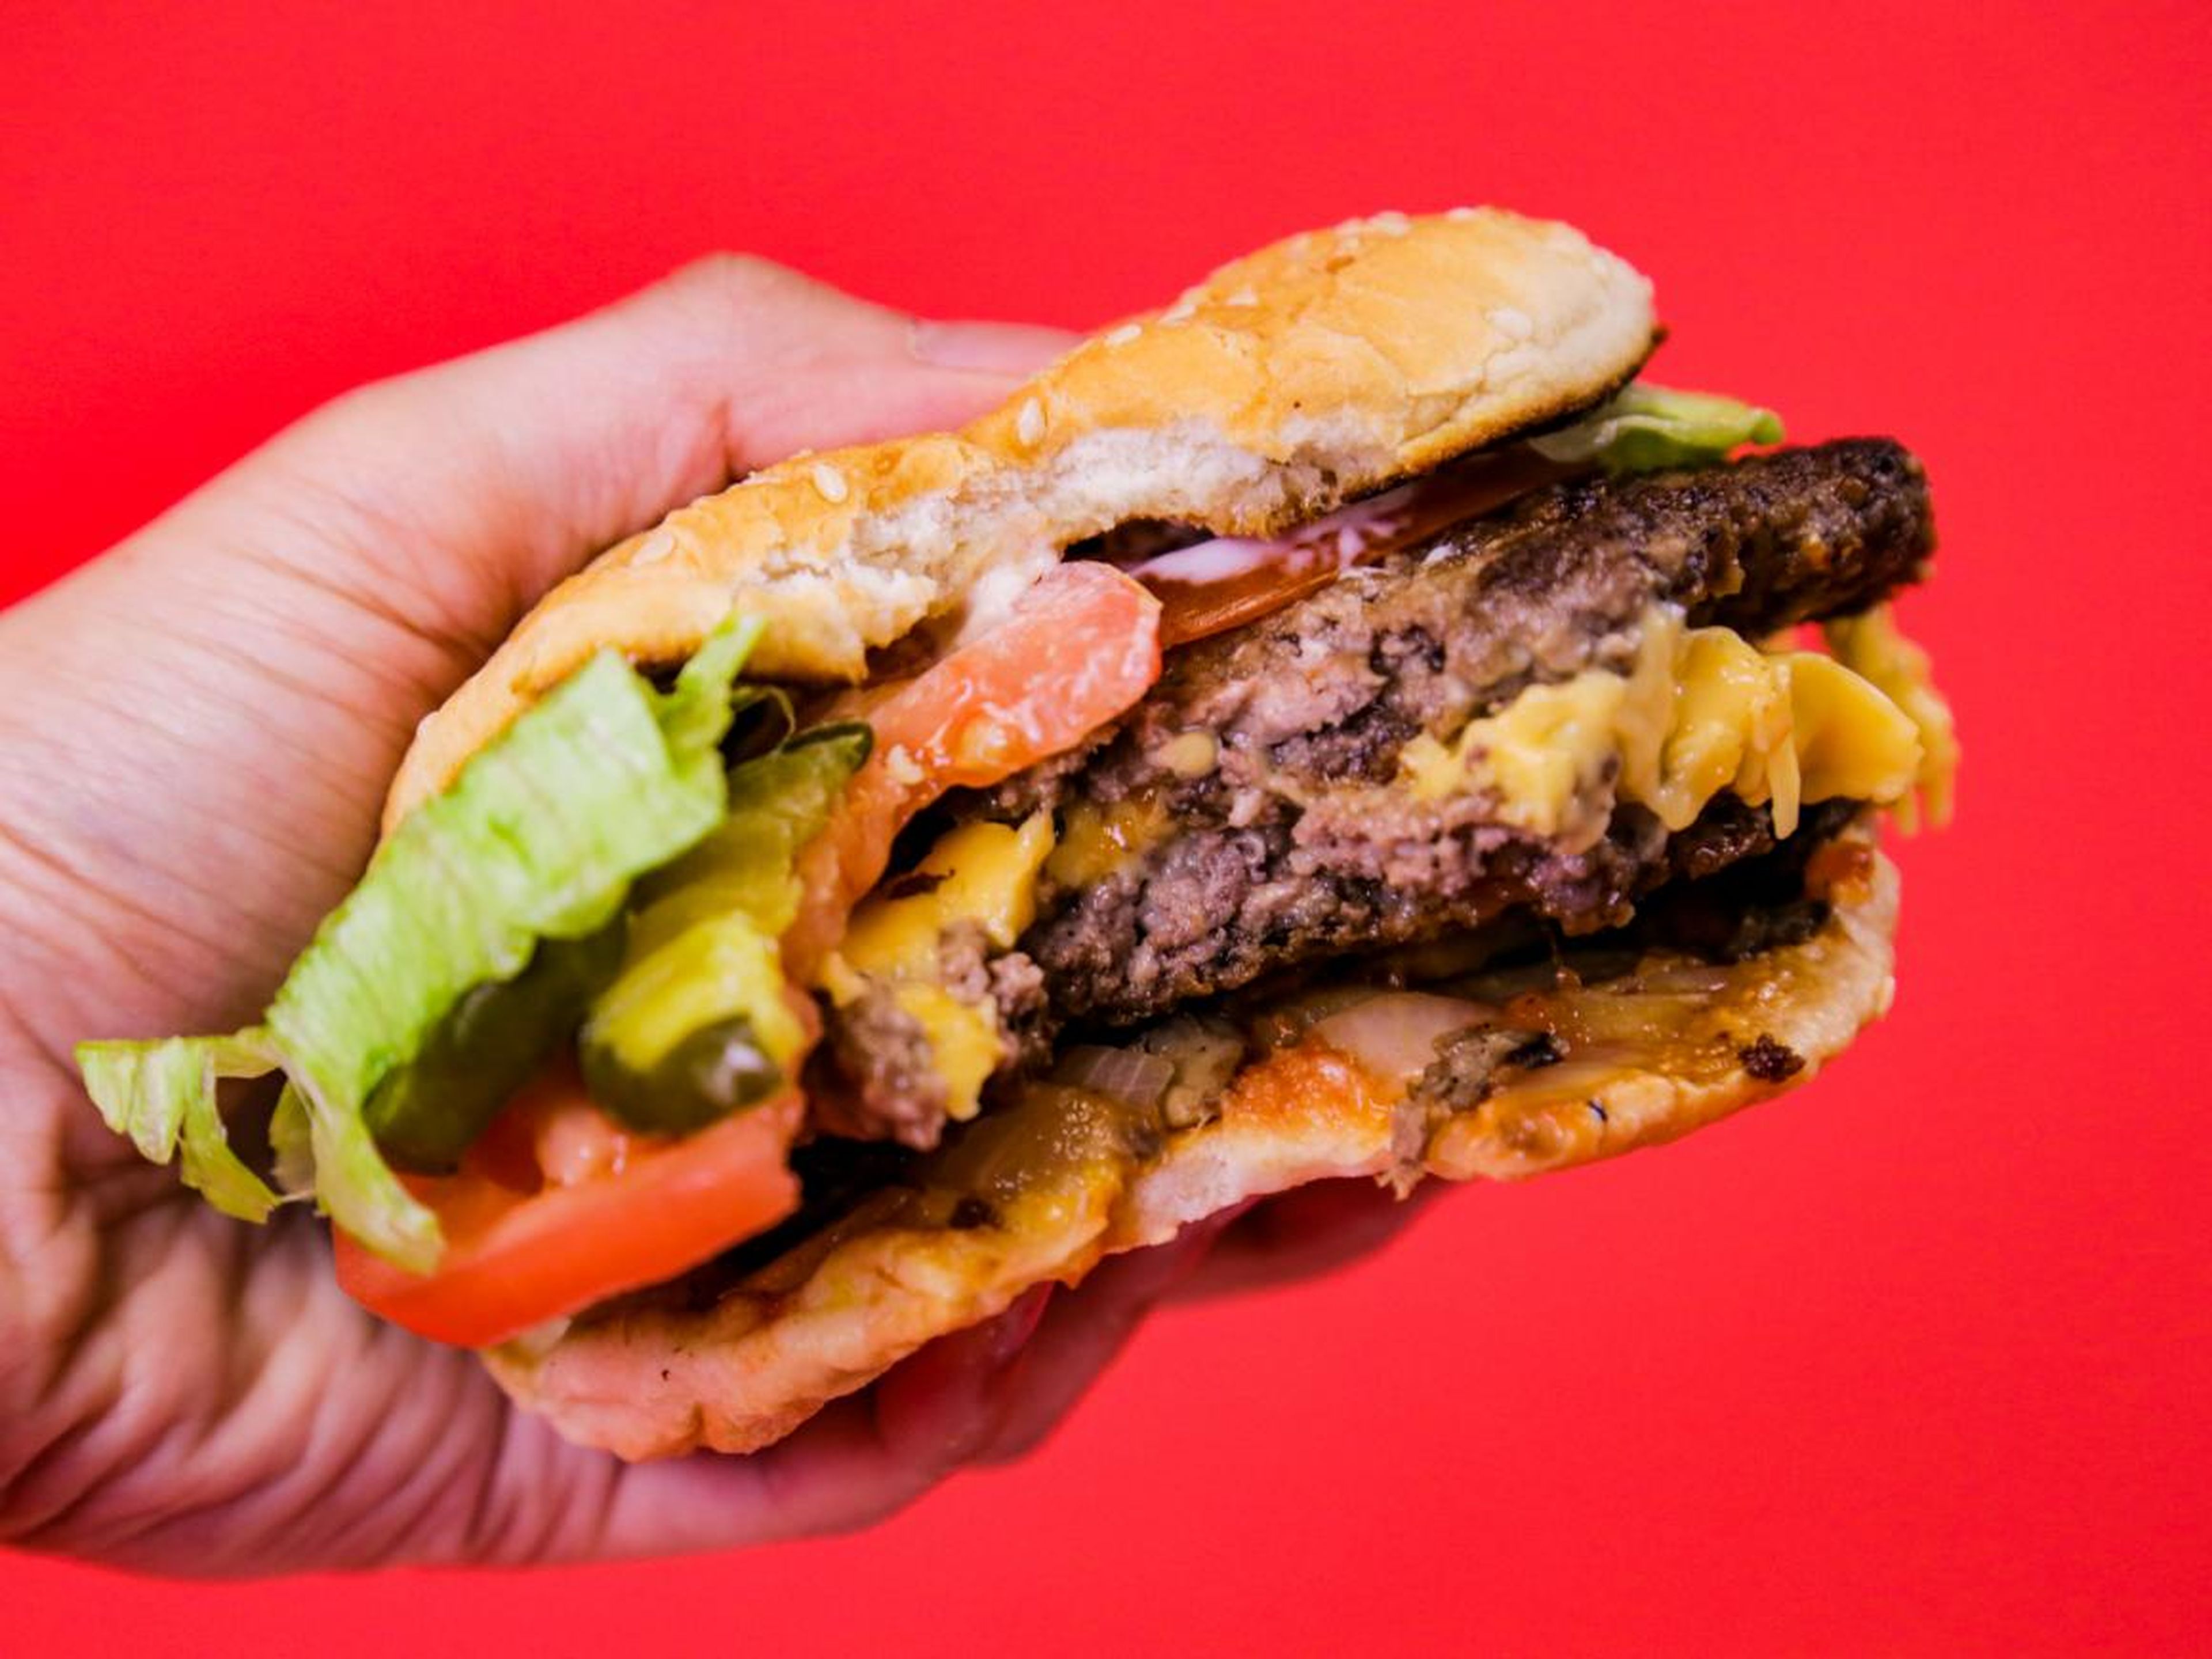 I tried 5 signature burgers from major chains. This meaty beast was the winner.